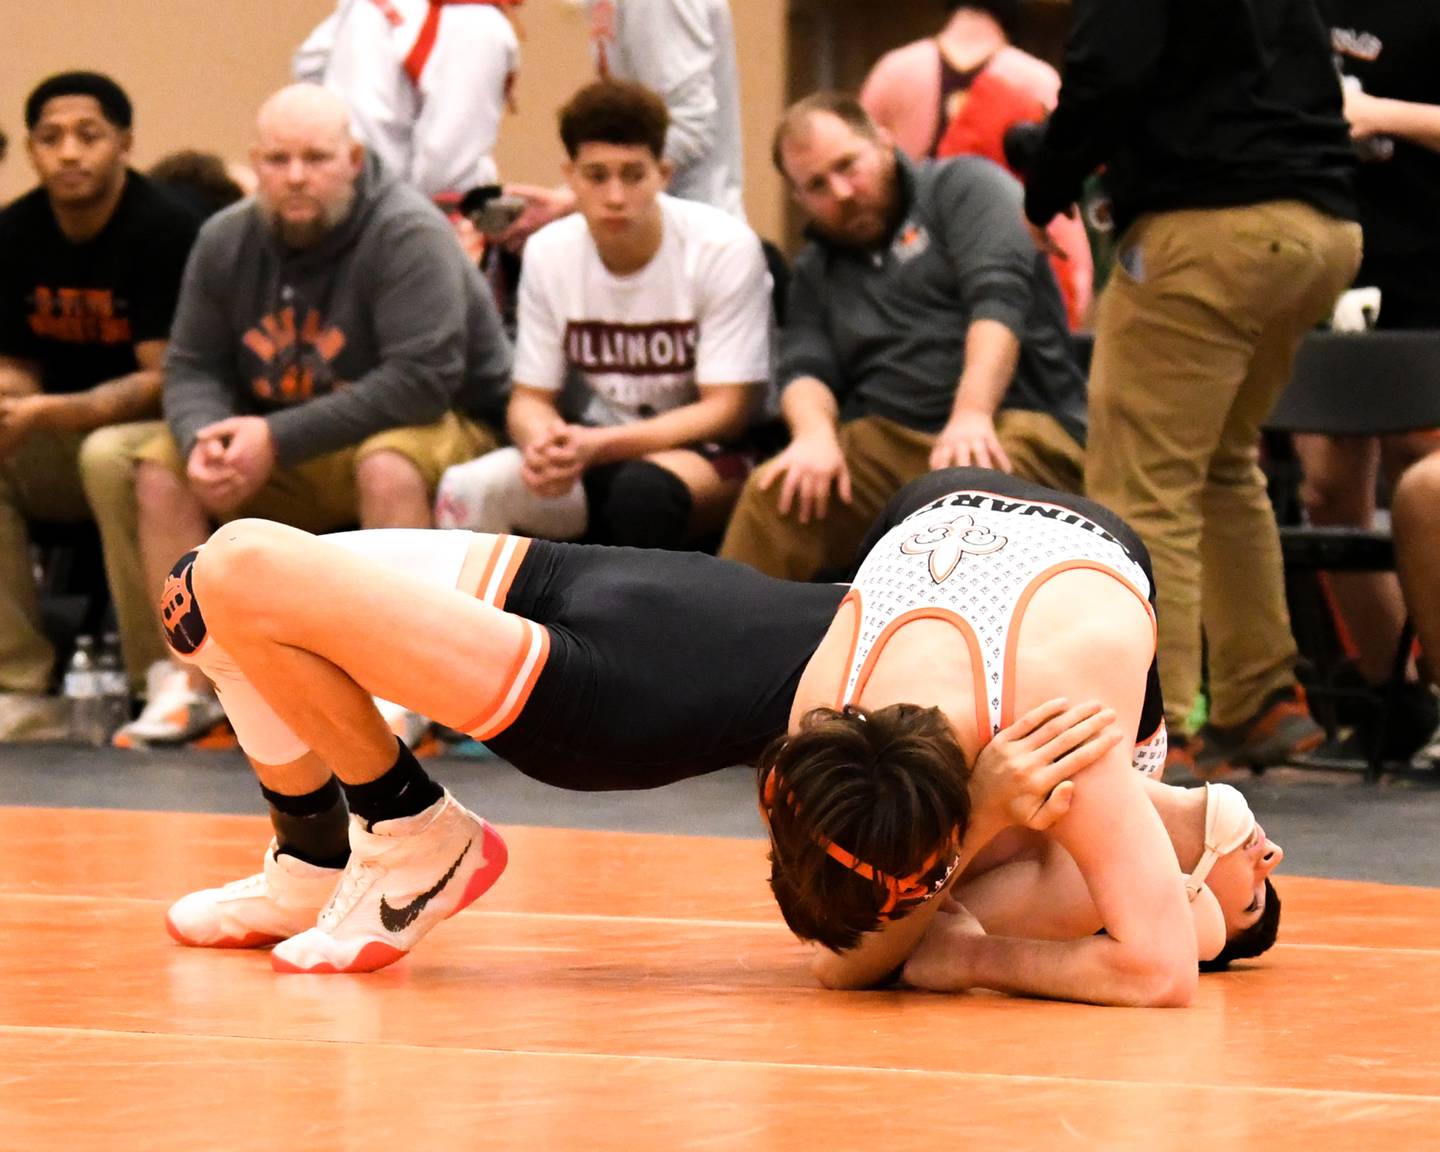 St. Charles East Dom Munaretto pins DeKalb’s wrestler Eduardo Castro in the 106 weight class during the first round on Friday Dec. 30th in The Don Flavin wrestling Invite held at DeKalb High School.